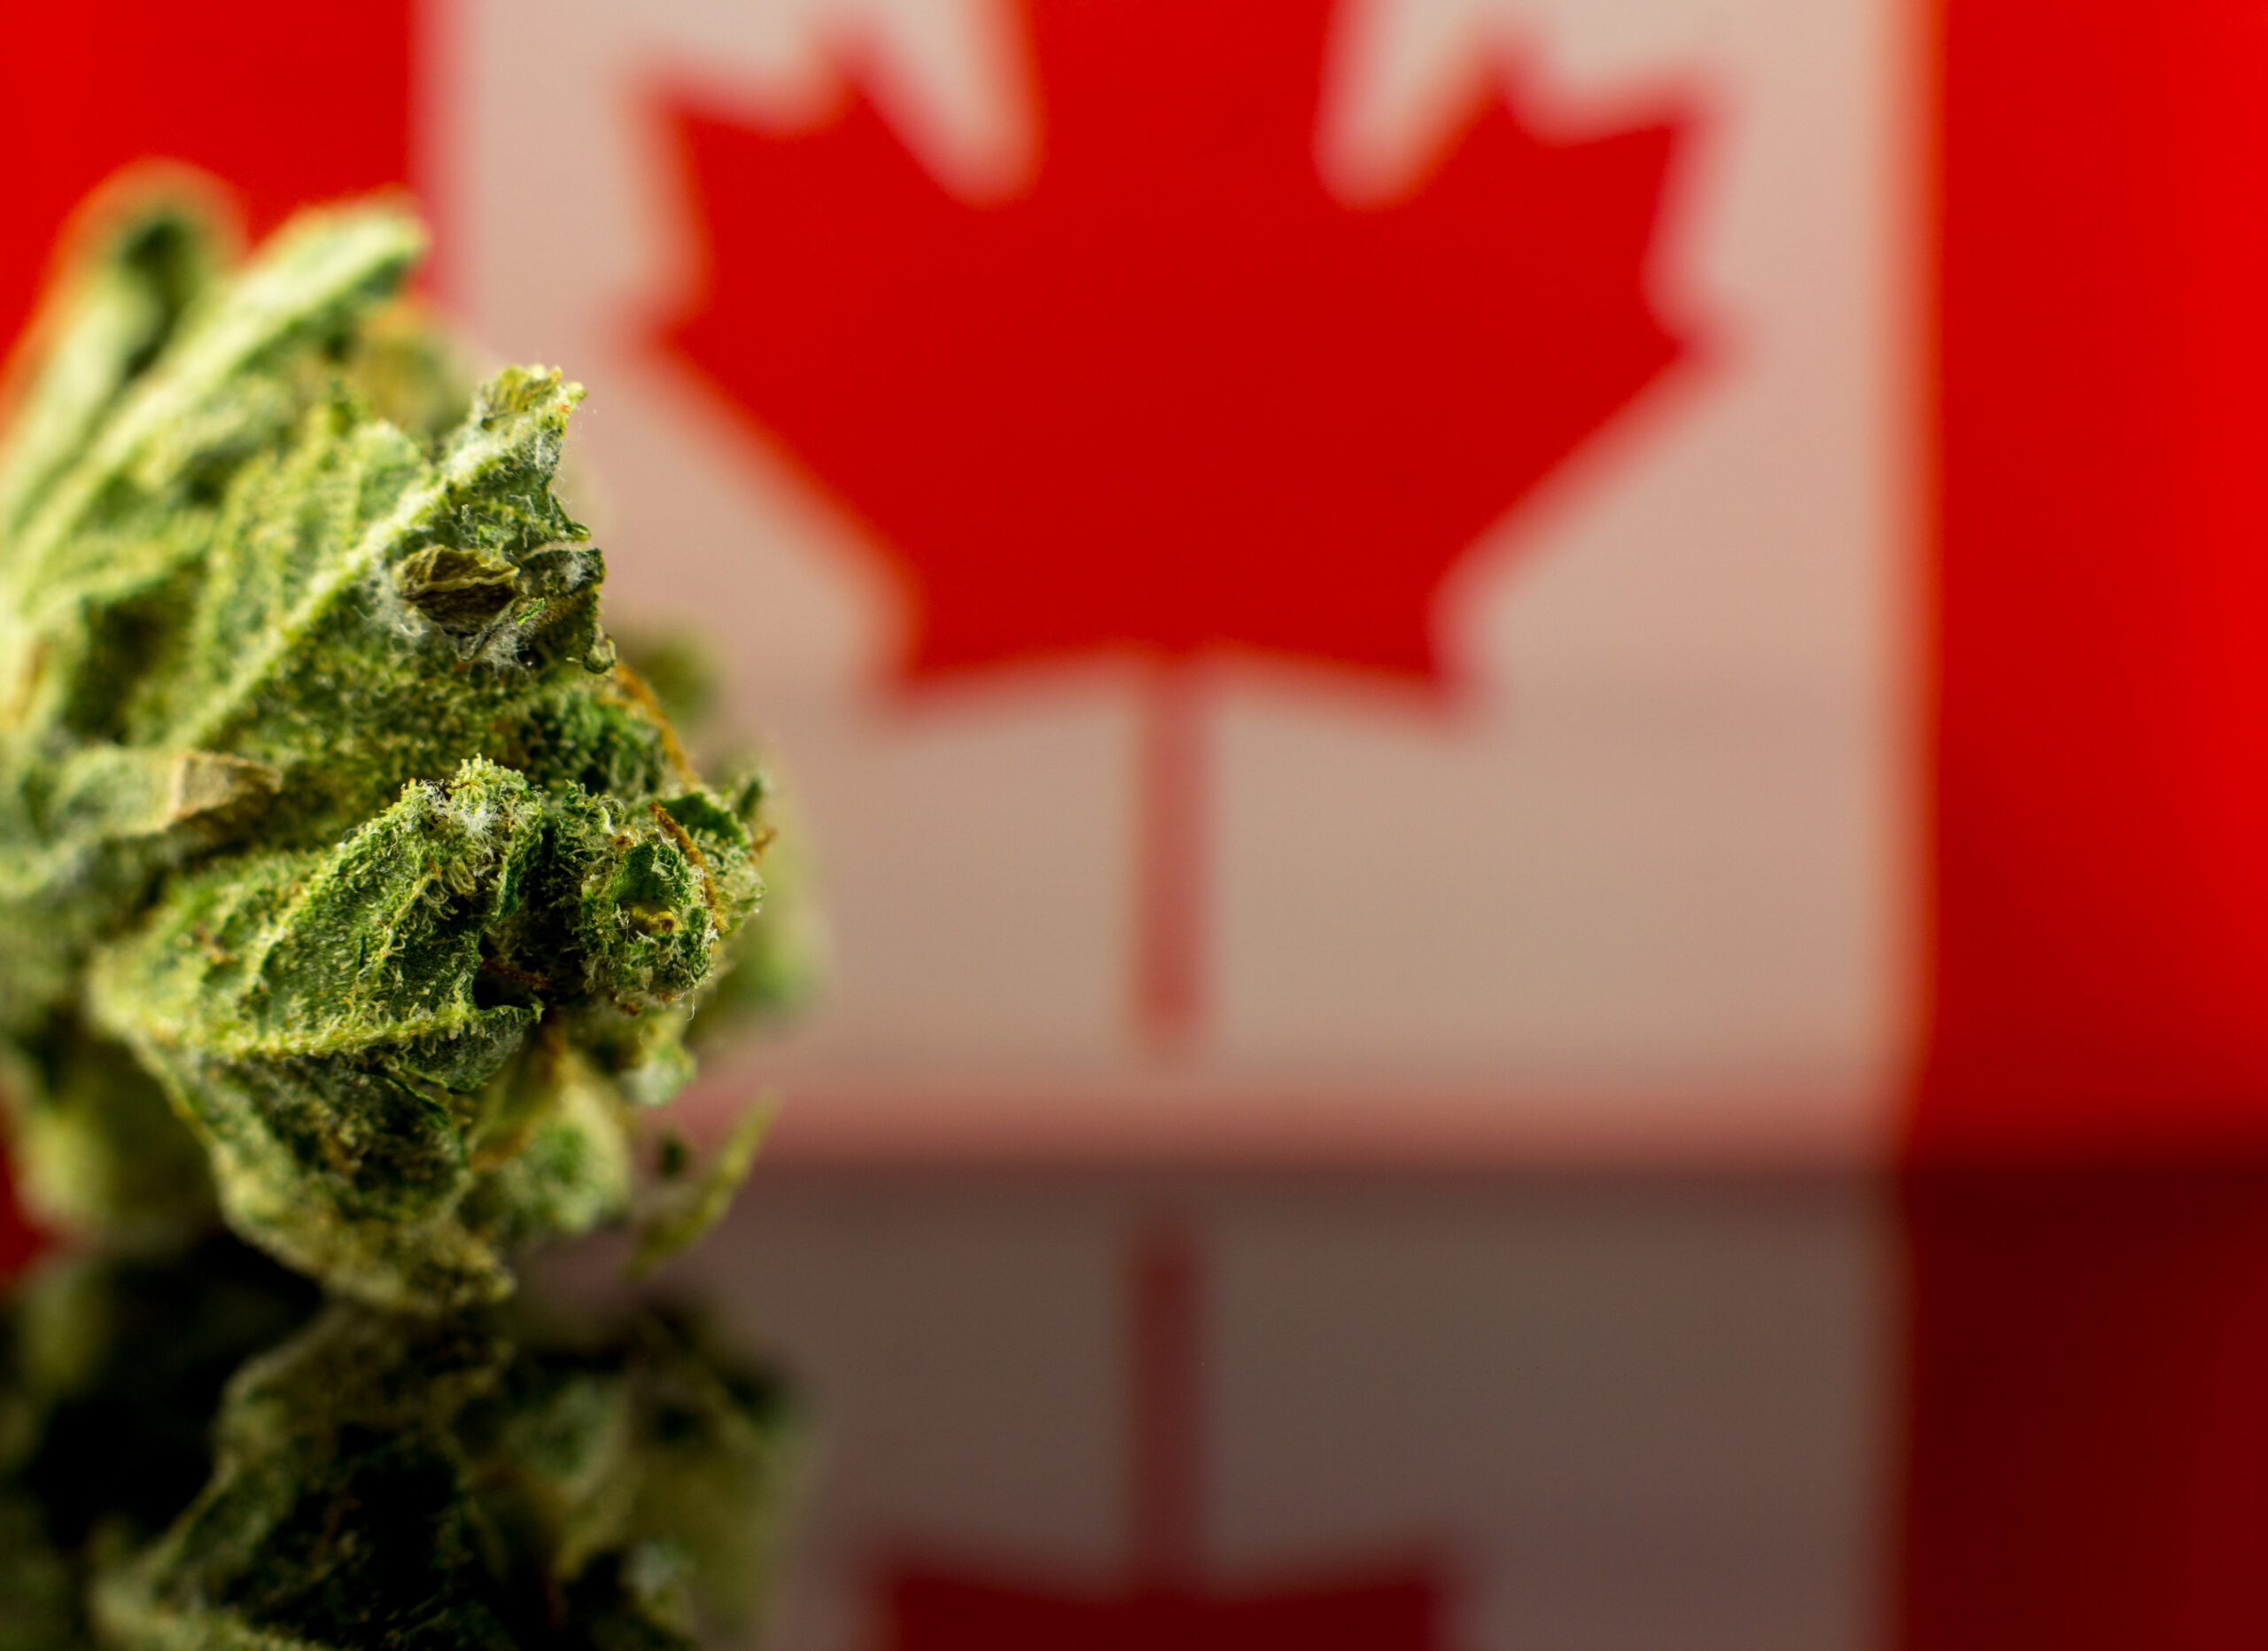 The Great Ontario Reefer Raffle: Why Canada’s Biggest Province Has So Few Dispensaries